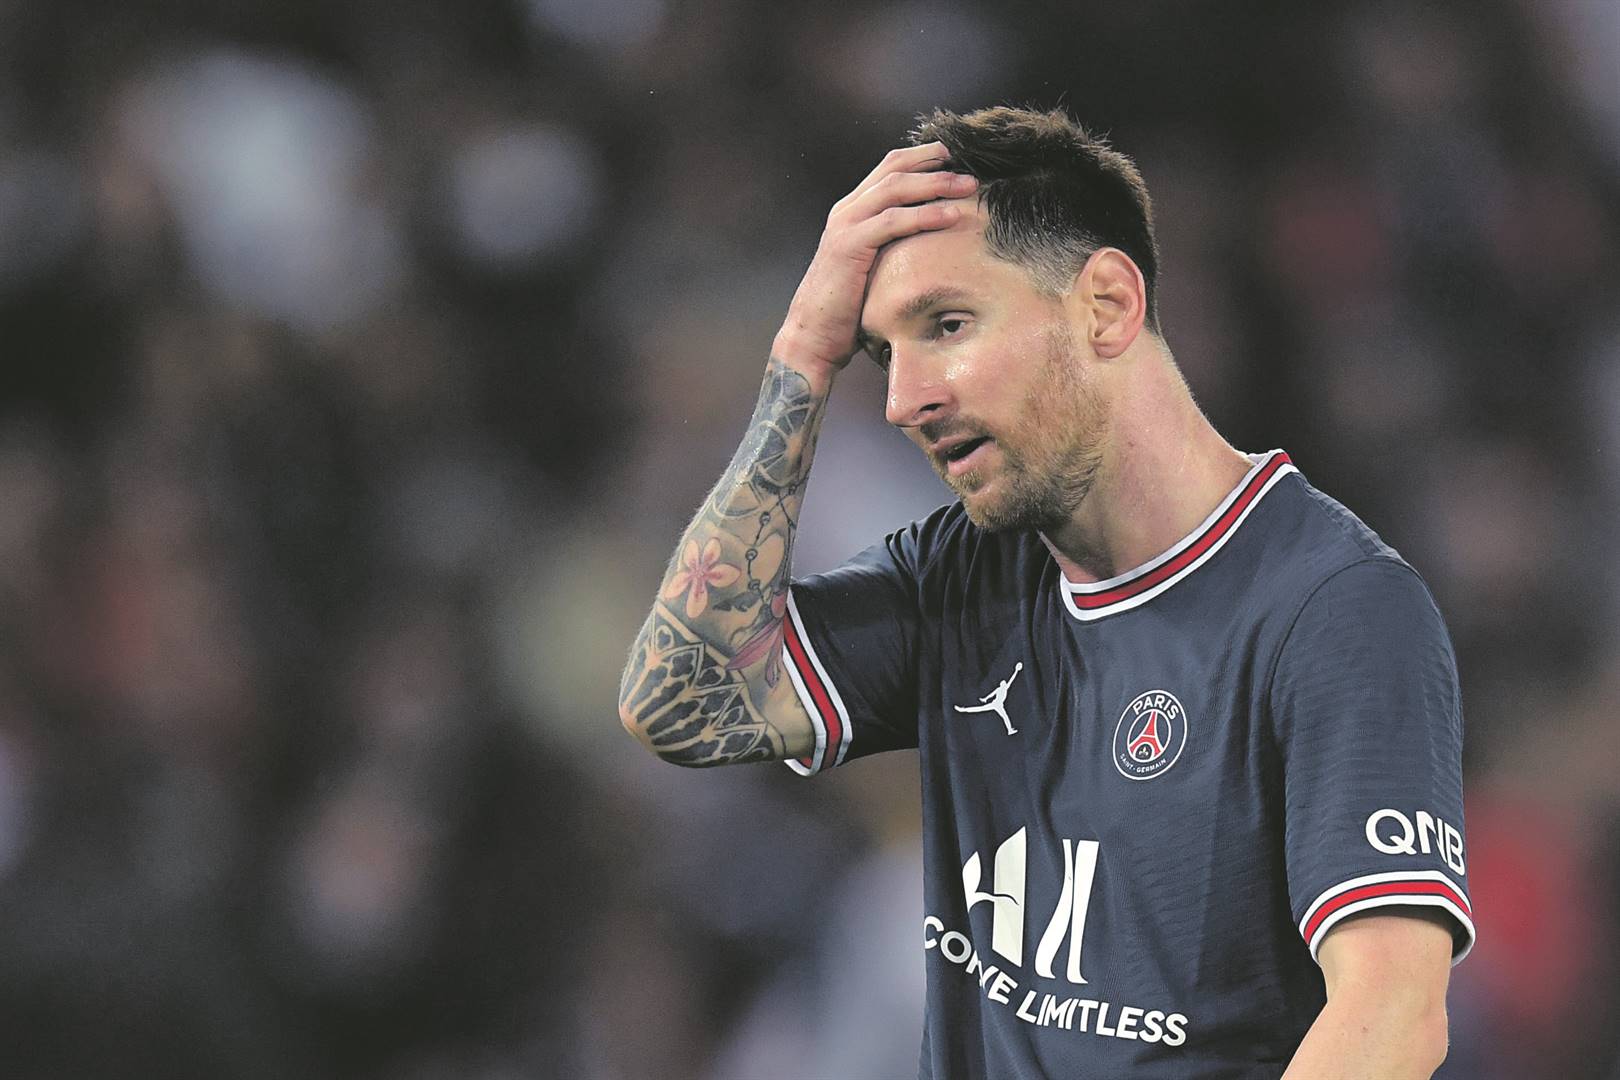 Lionel Messi in PSG colours. Photo: ANP Sport / Getty Images